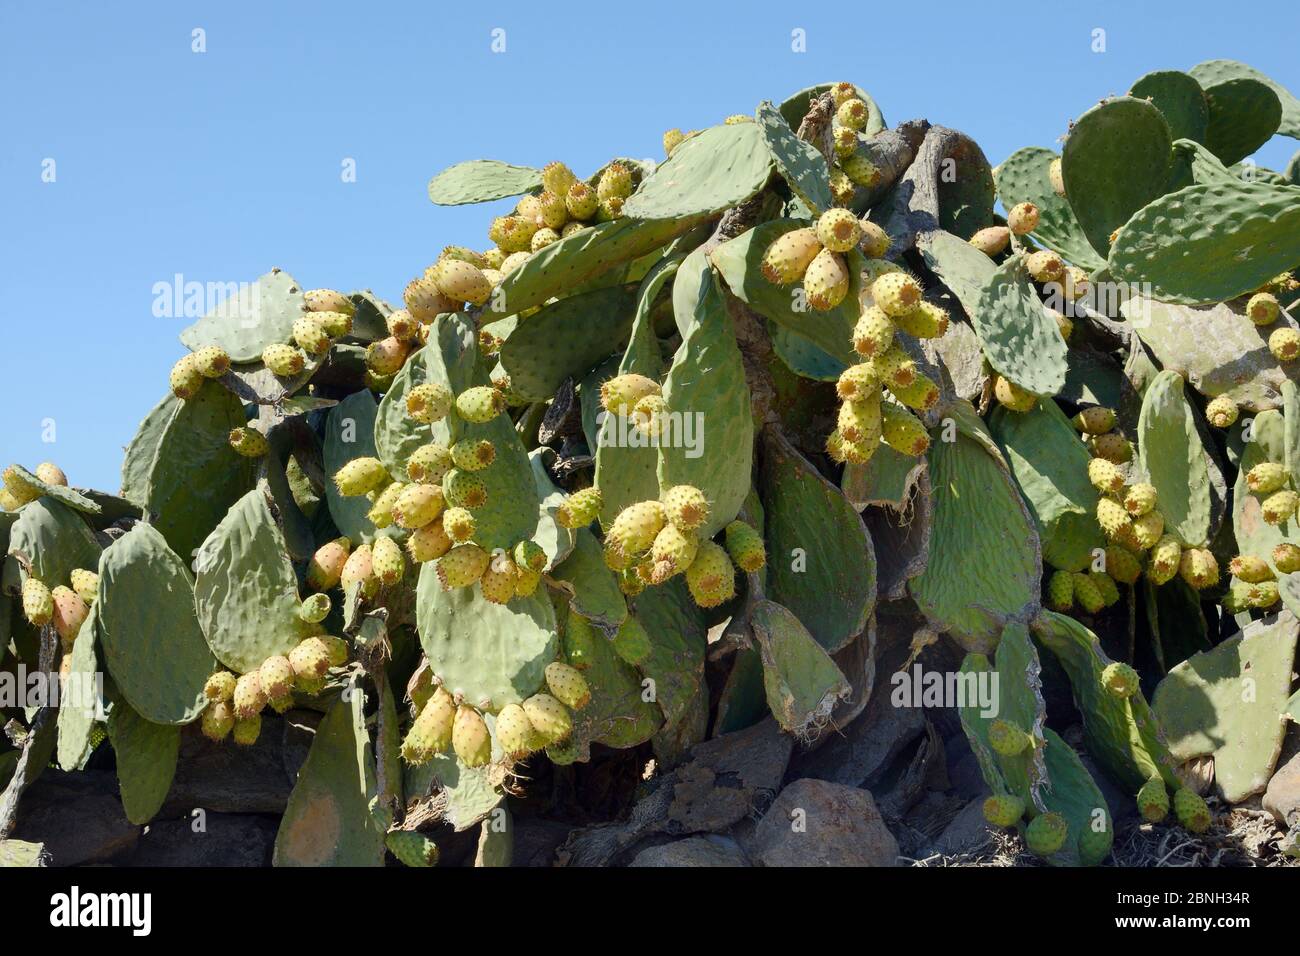 Prickly pear cactus / Barbary fig (Opuntia ficus-indica) with ripening fruits, Patmos, Dodecanese, Greece, August 2013. Stock Photo